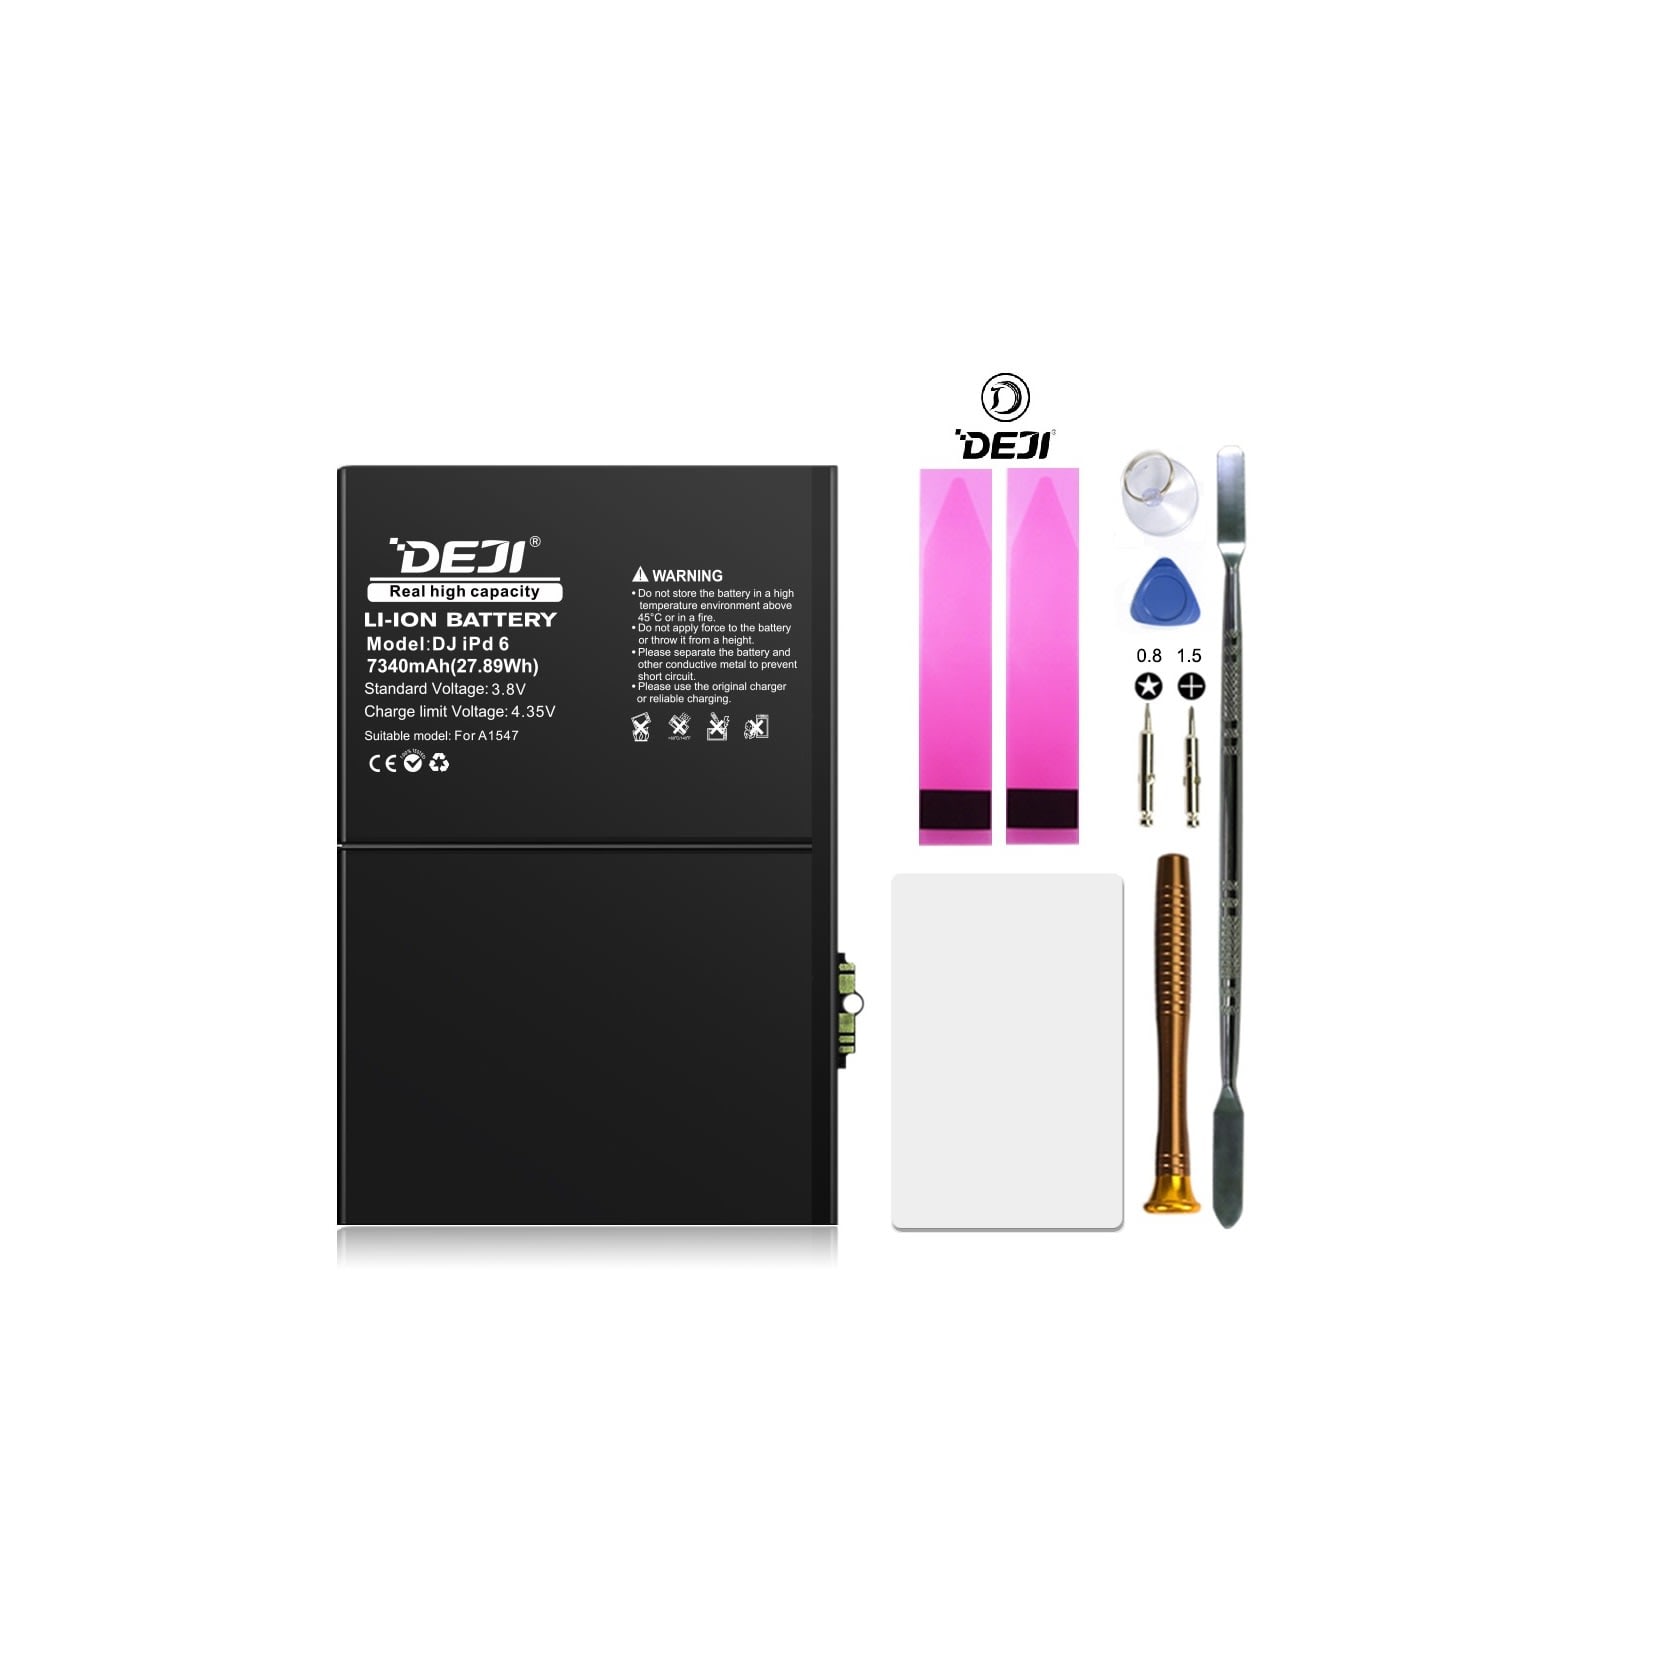 Ipad Air 2 Replacement Battery  Apple Ipad Air 2 A1567 Battery